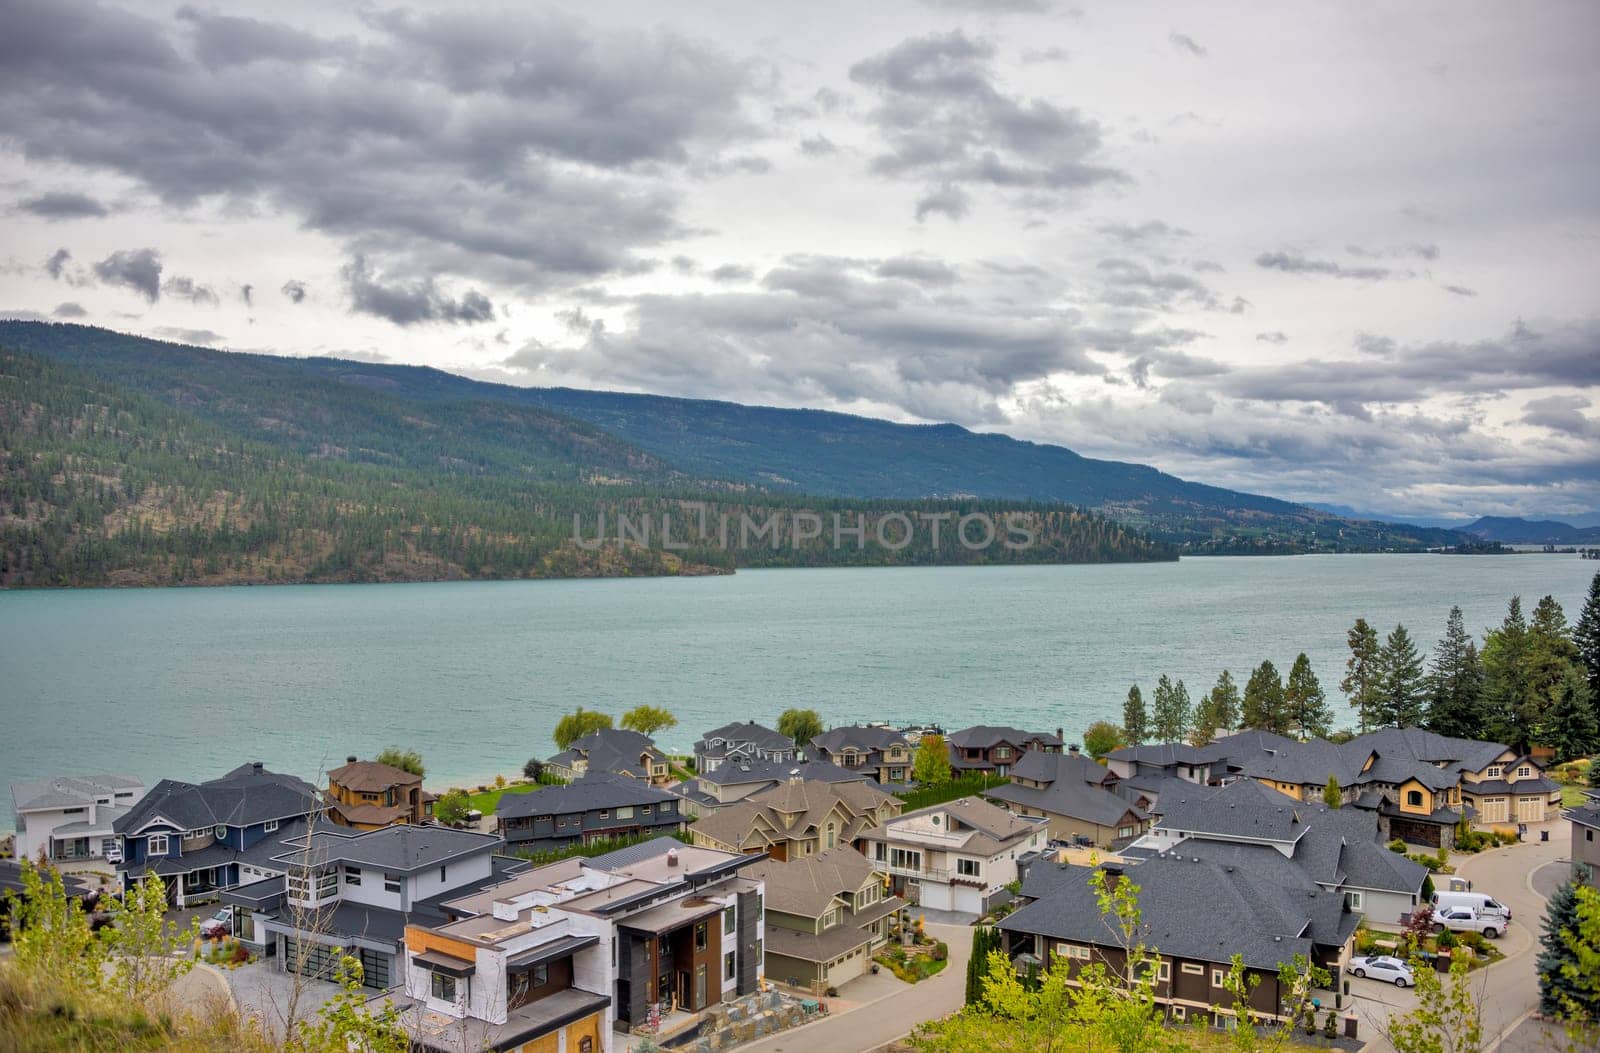 A perfect neighborhood. Luxury houses at waterfront on Kalamalka lake with nice overview of the lake